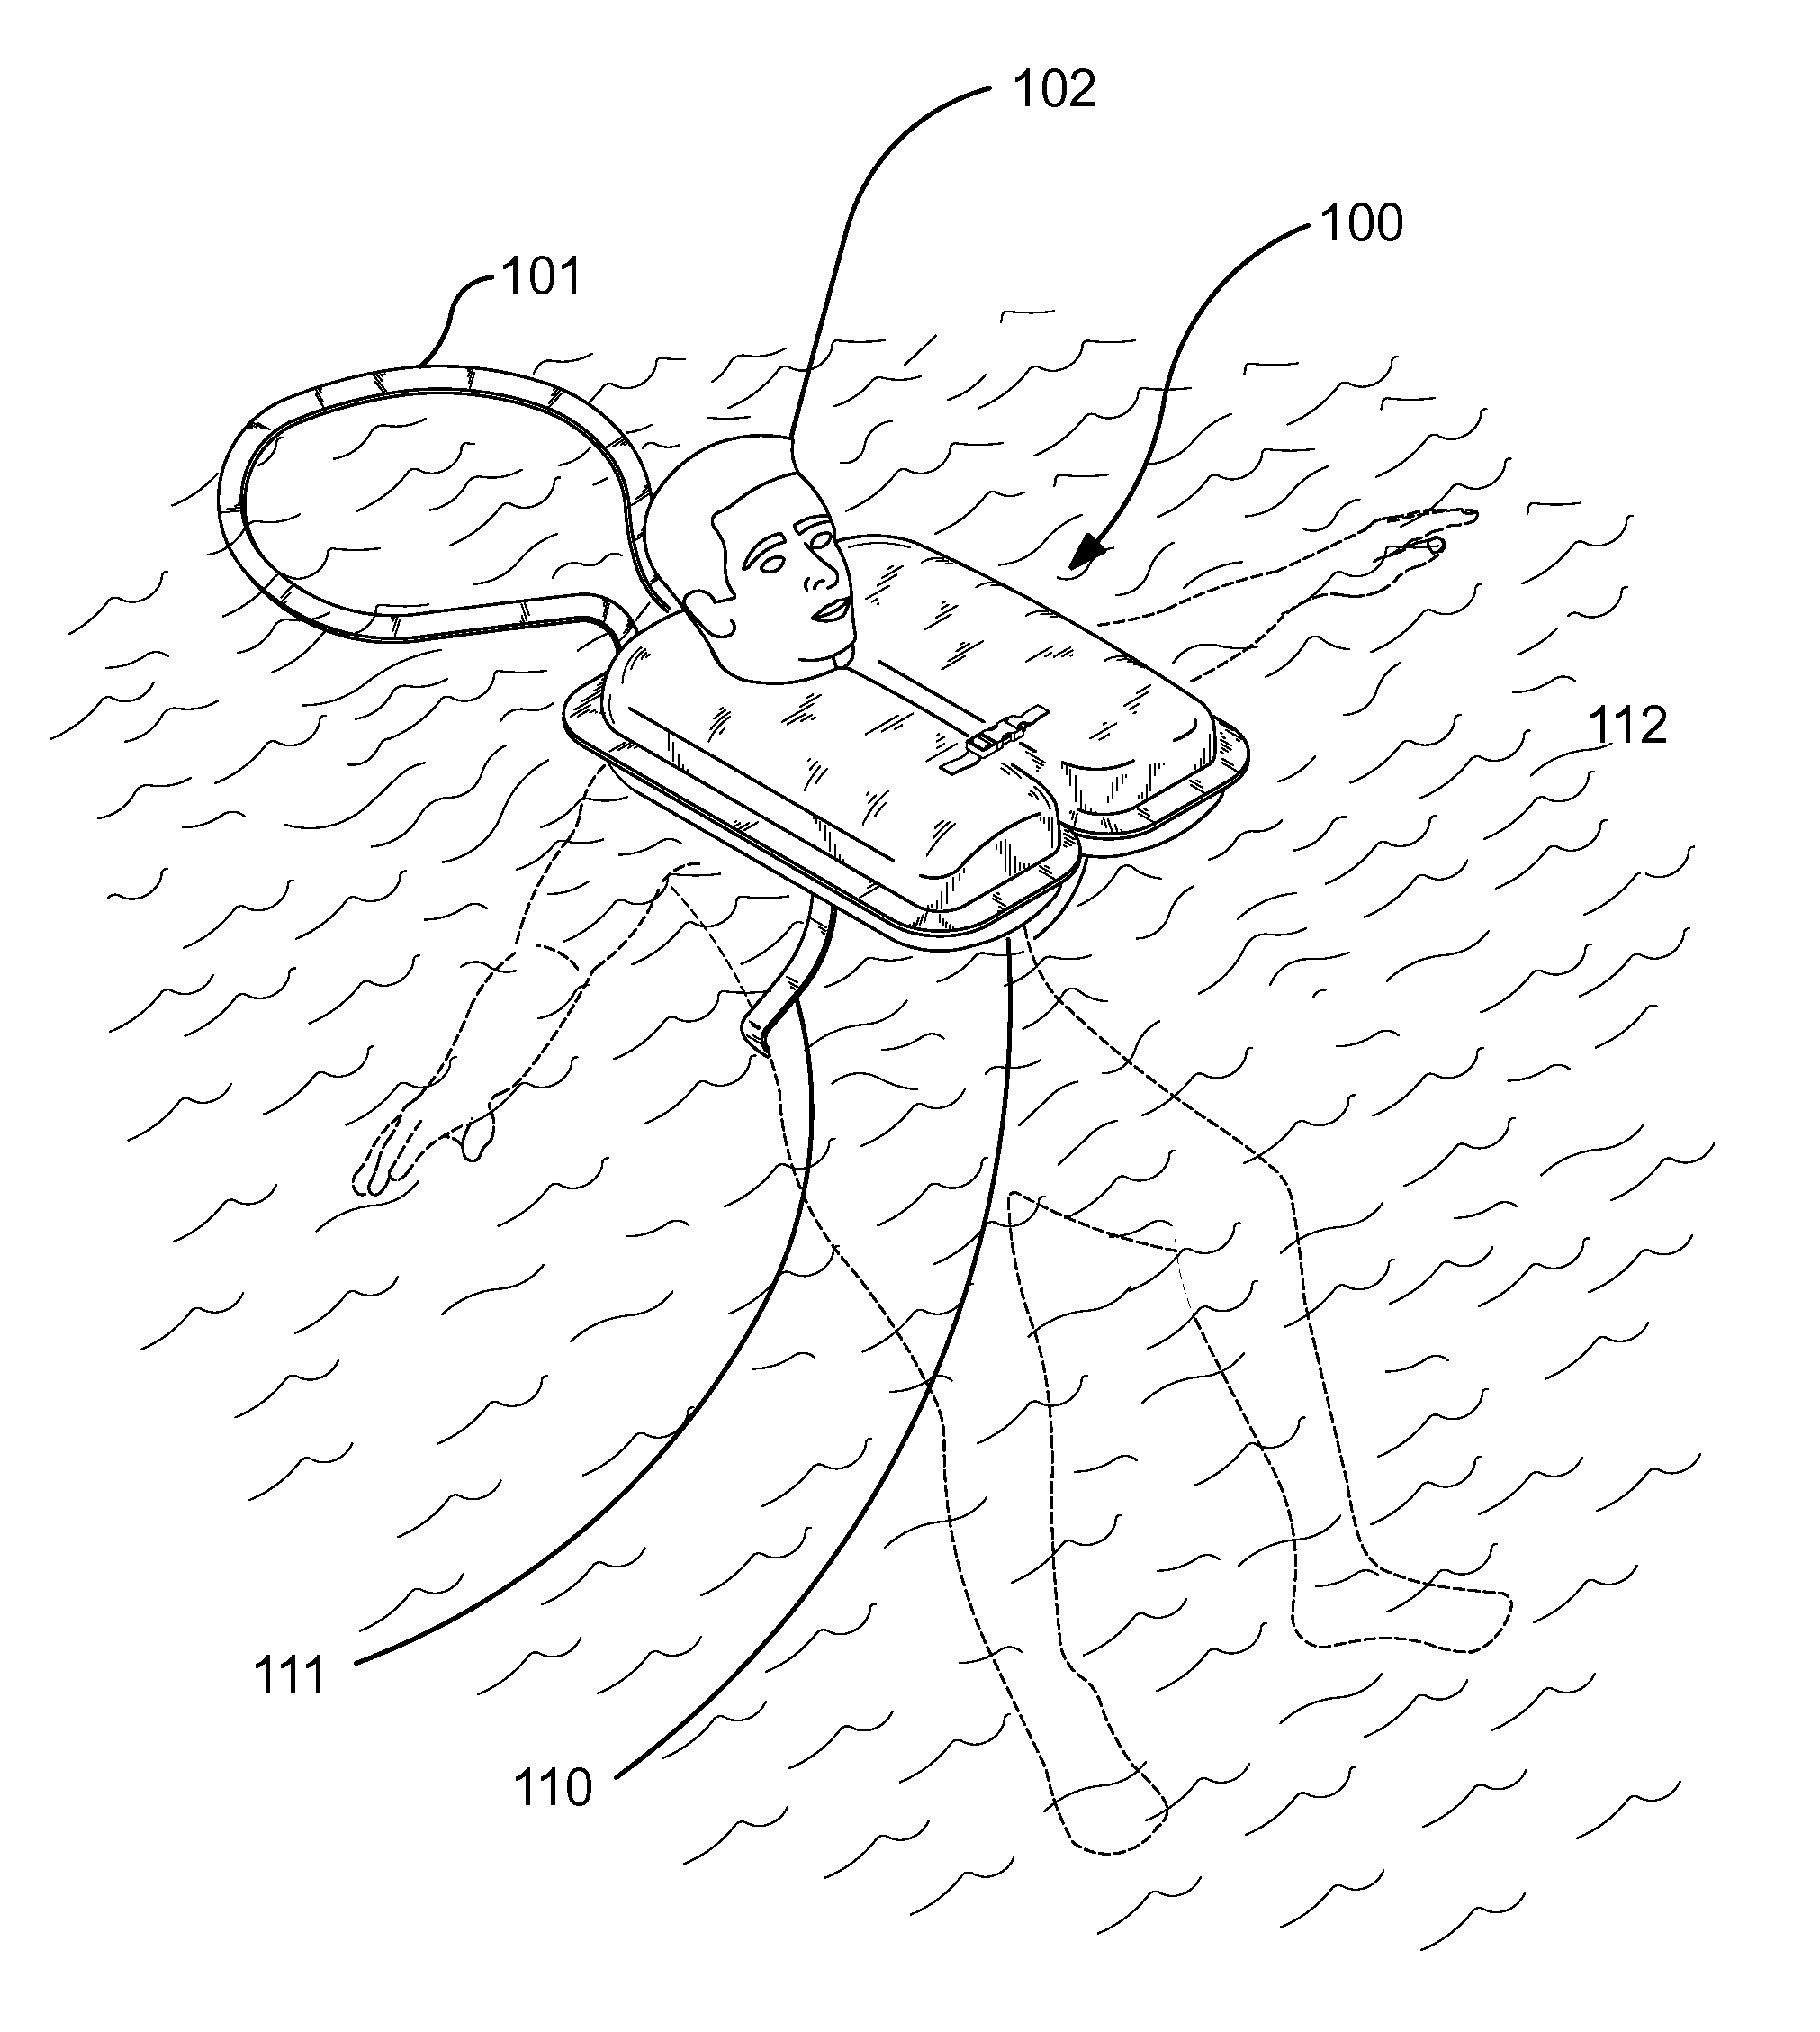 Multi-functional, personal flotation device